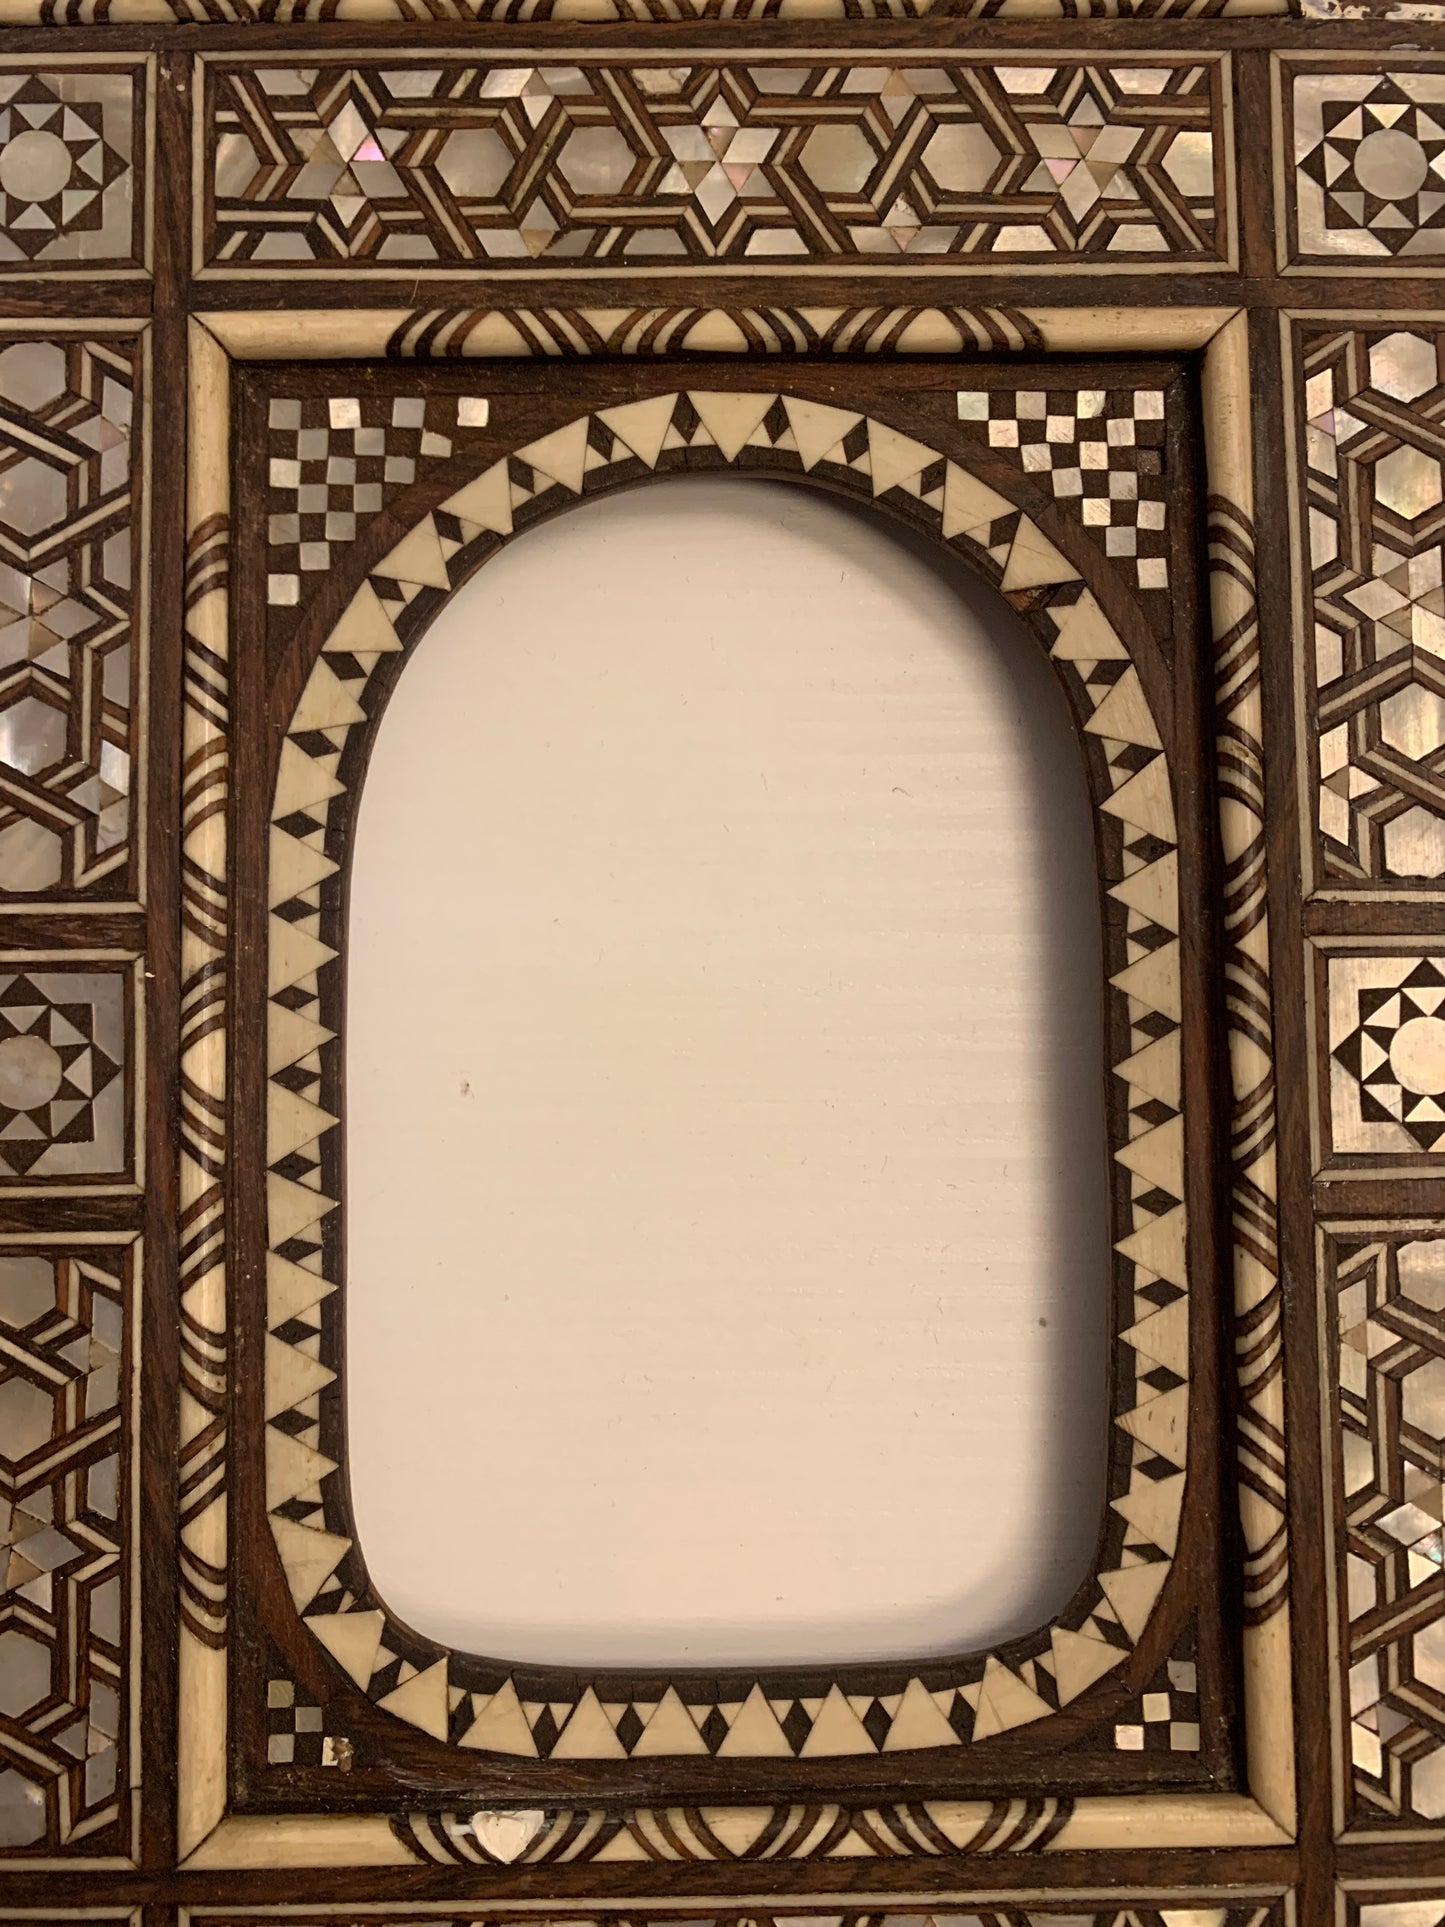 Oriental style frame with mother-of-pearl marquetry.